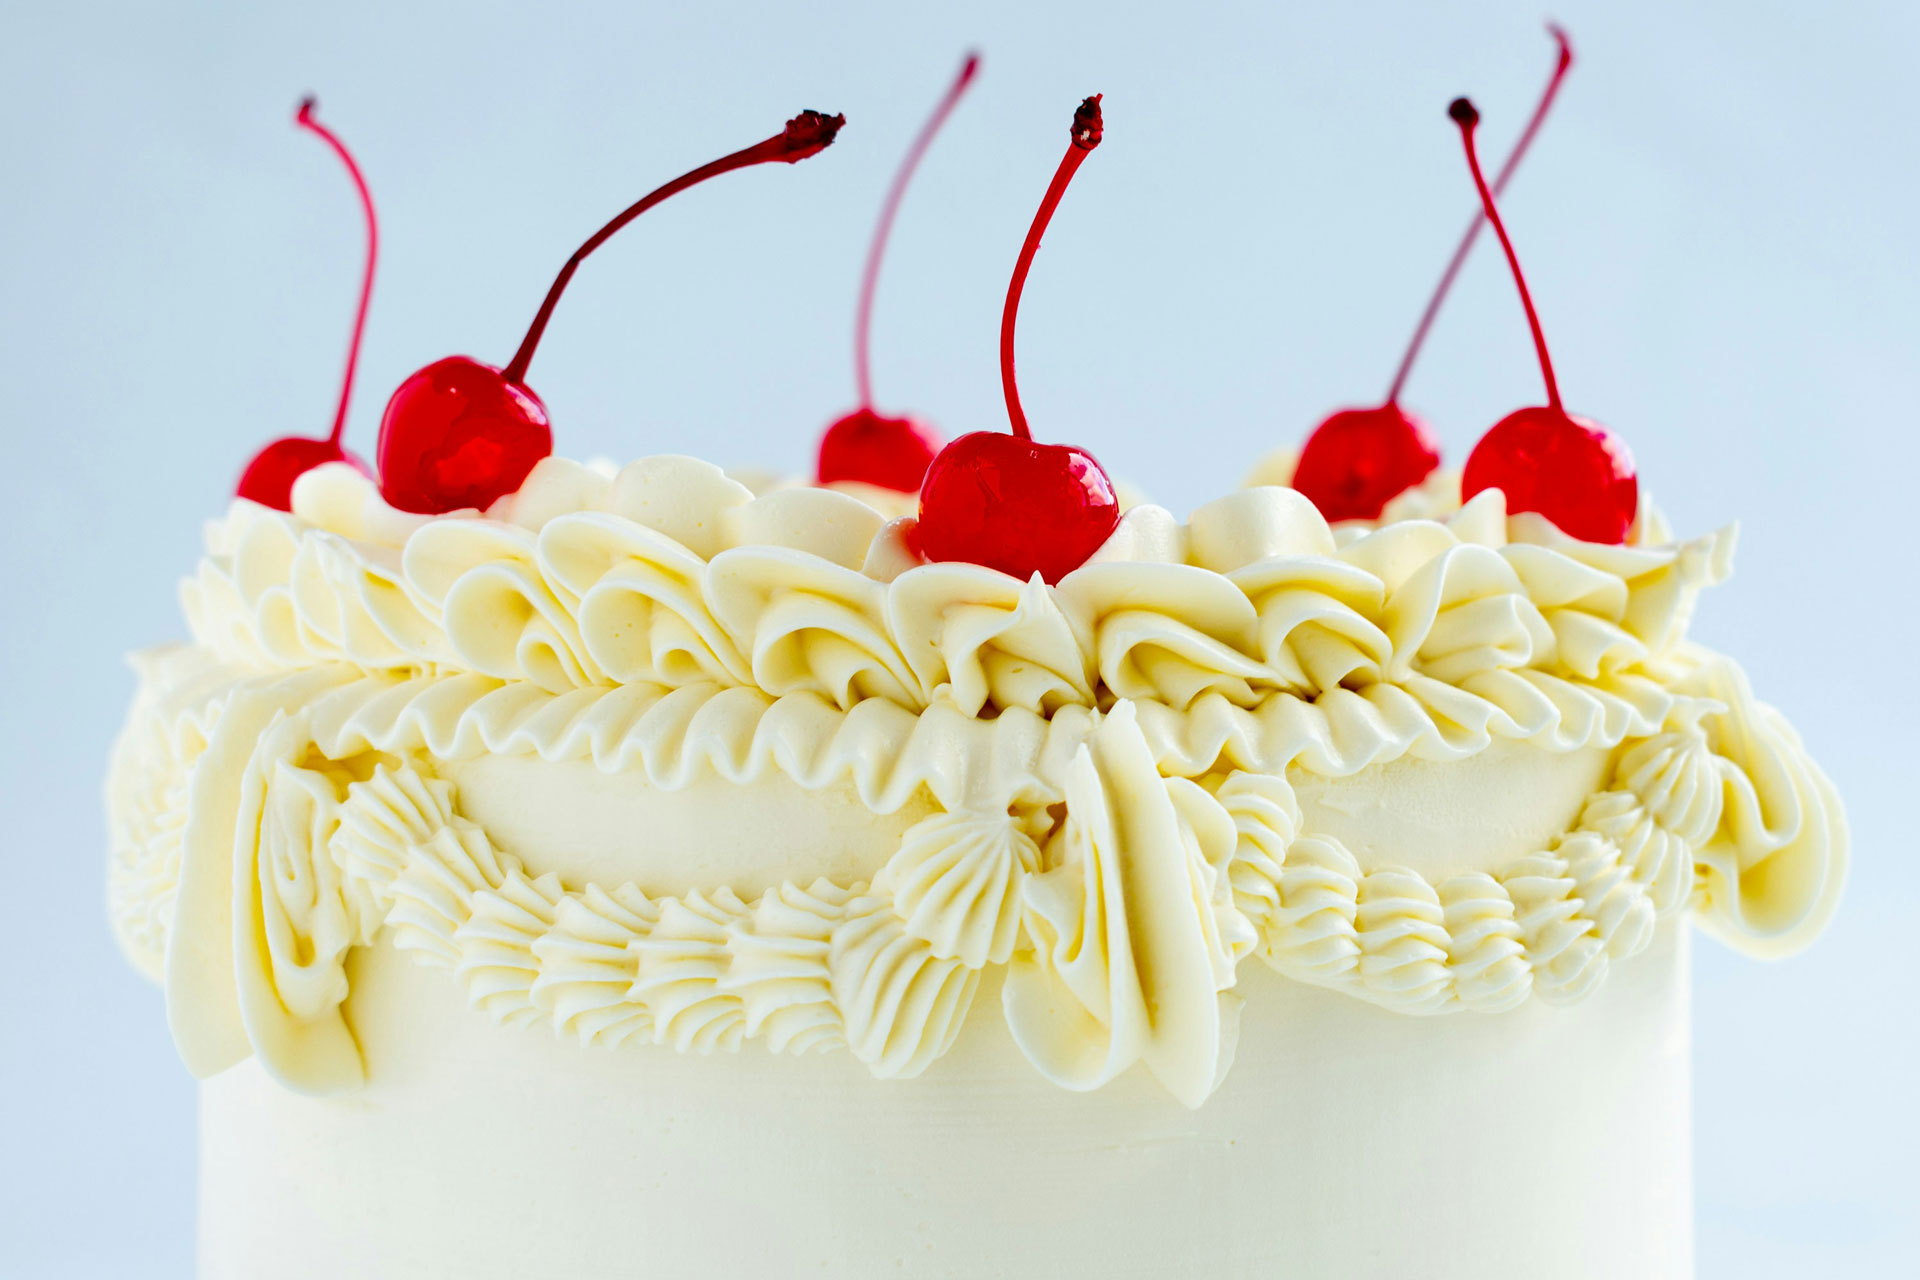 Is A Stab Cake The Perfect Valentine’s Antidote?